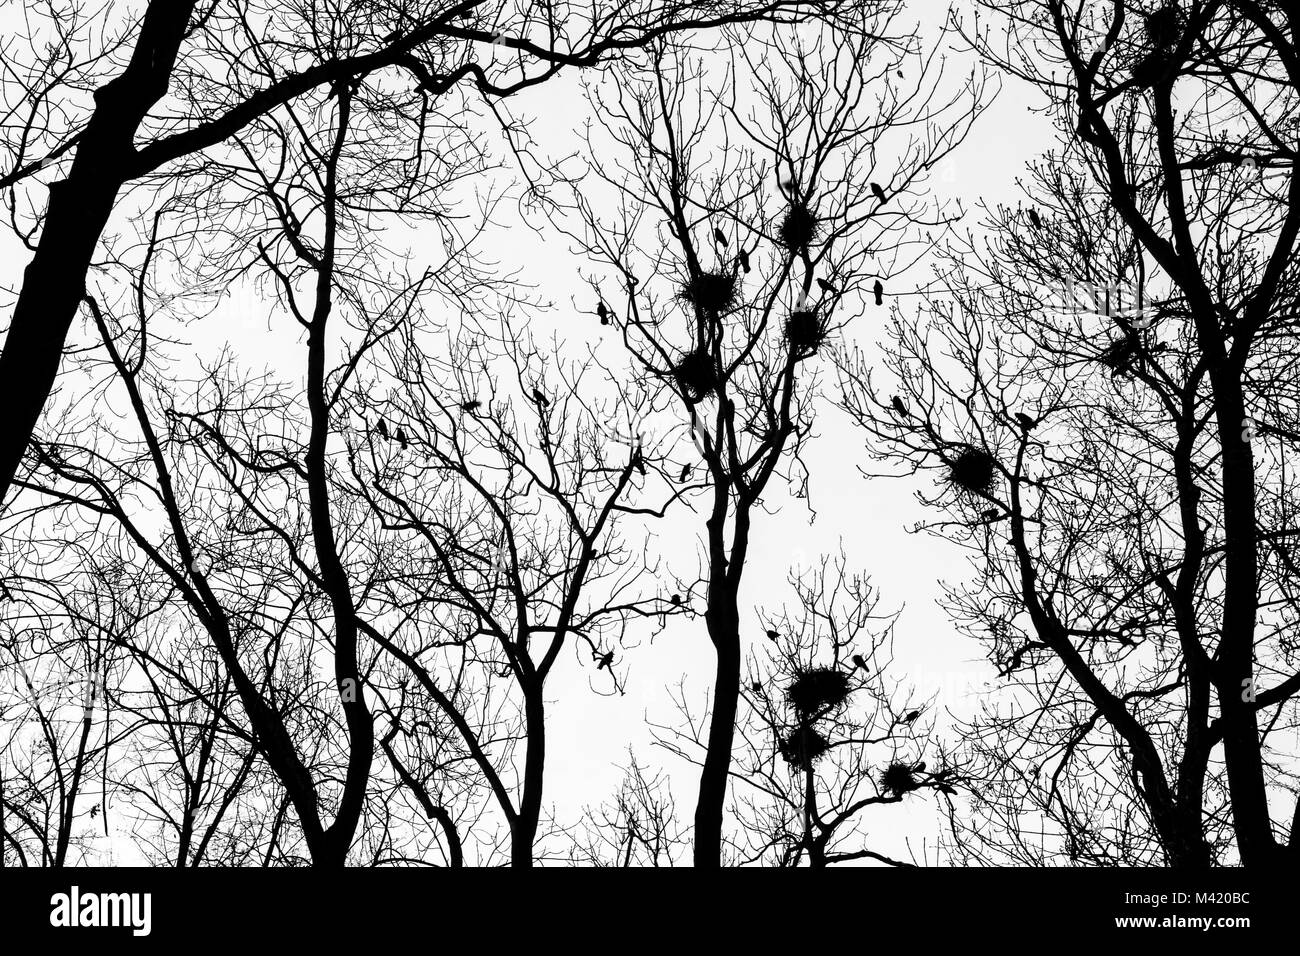 A black and white picture from the city park when the darkness comes. The silhouettes of the trees are only visible with the nests of the crows. Stock Photo